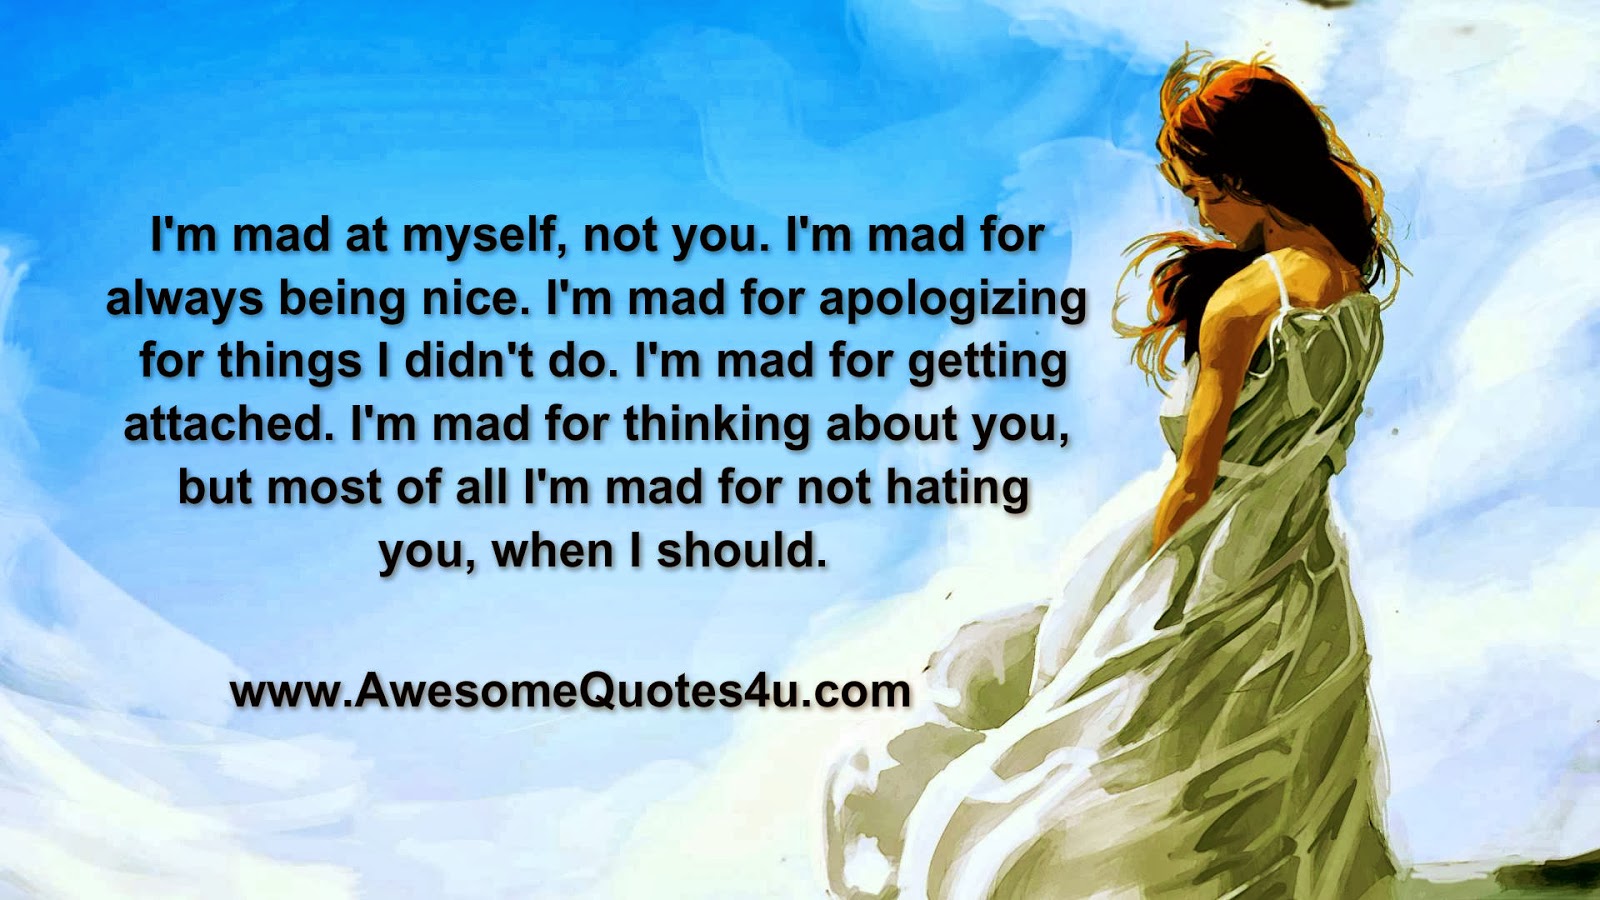 L myself. Myself картинки. Quotes about myself. Being Mad. Mad at you.